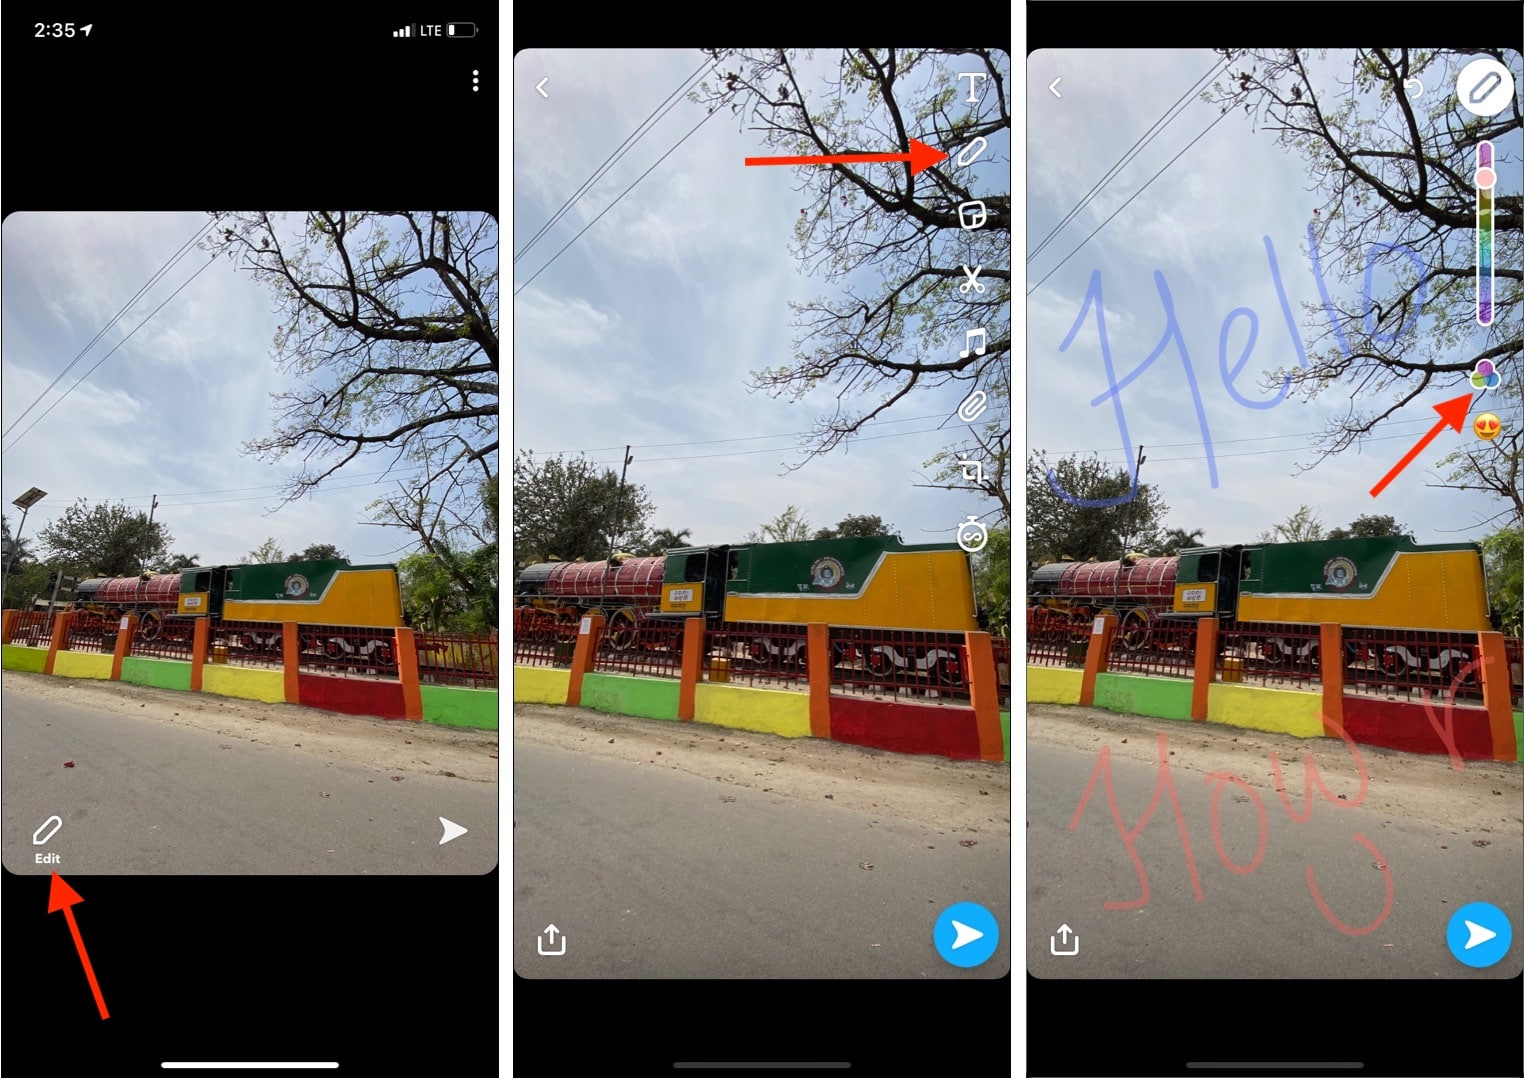 Get transparent colors using the Snapchat app